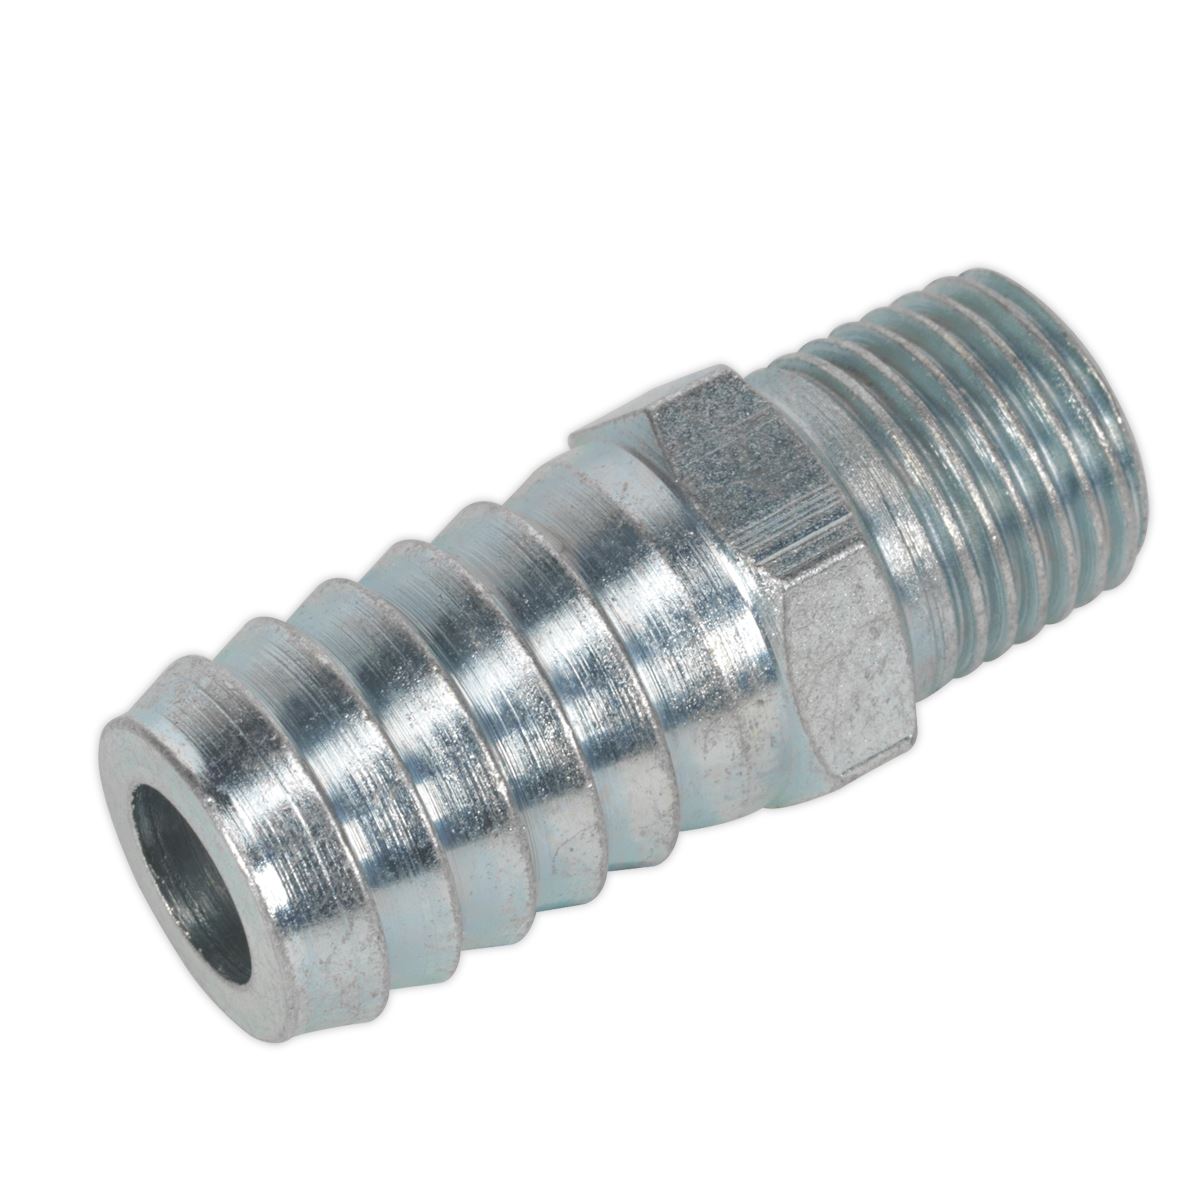 PCL Screwed Tailpiece Male 1/4"BSPT - 1/2" Hose Pack of 5